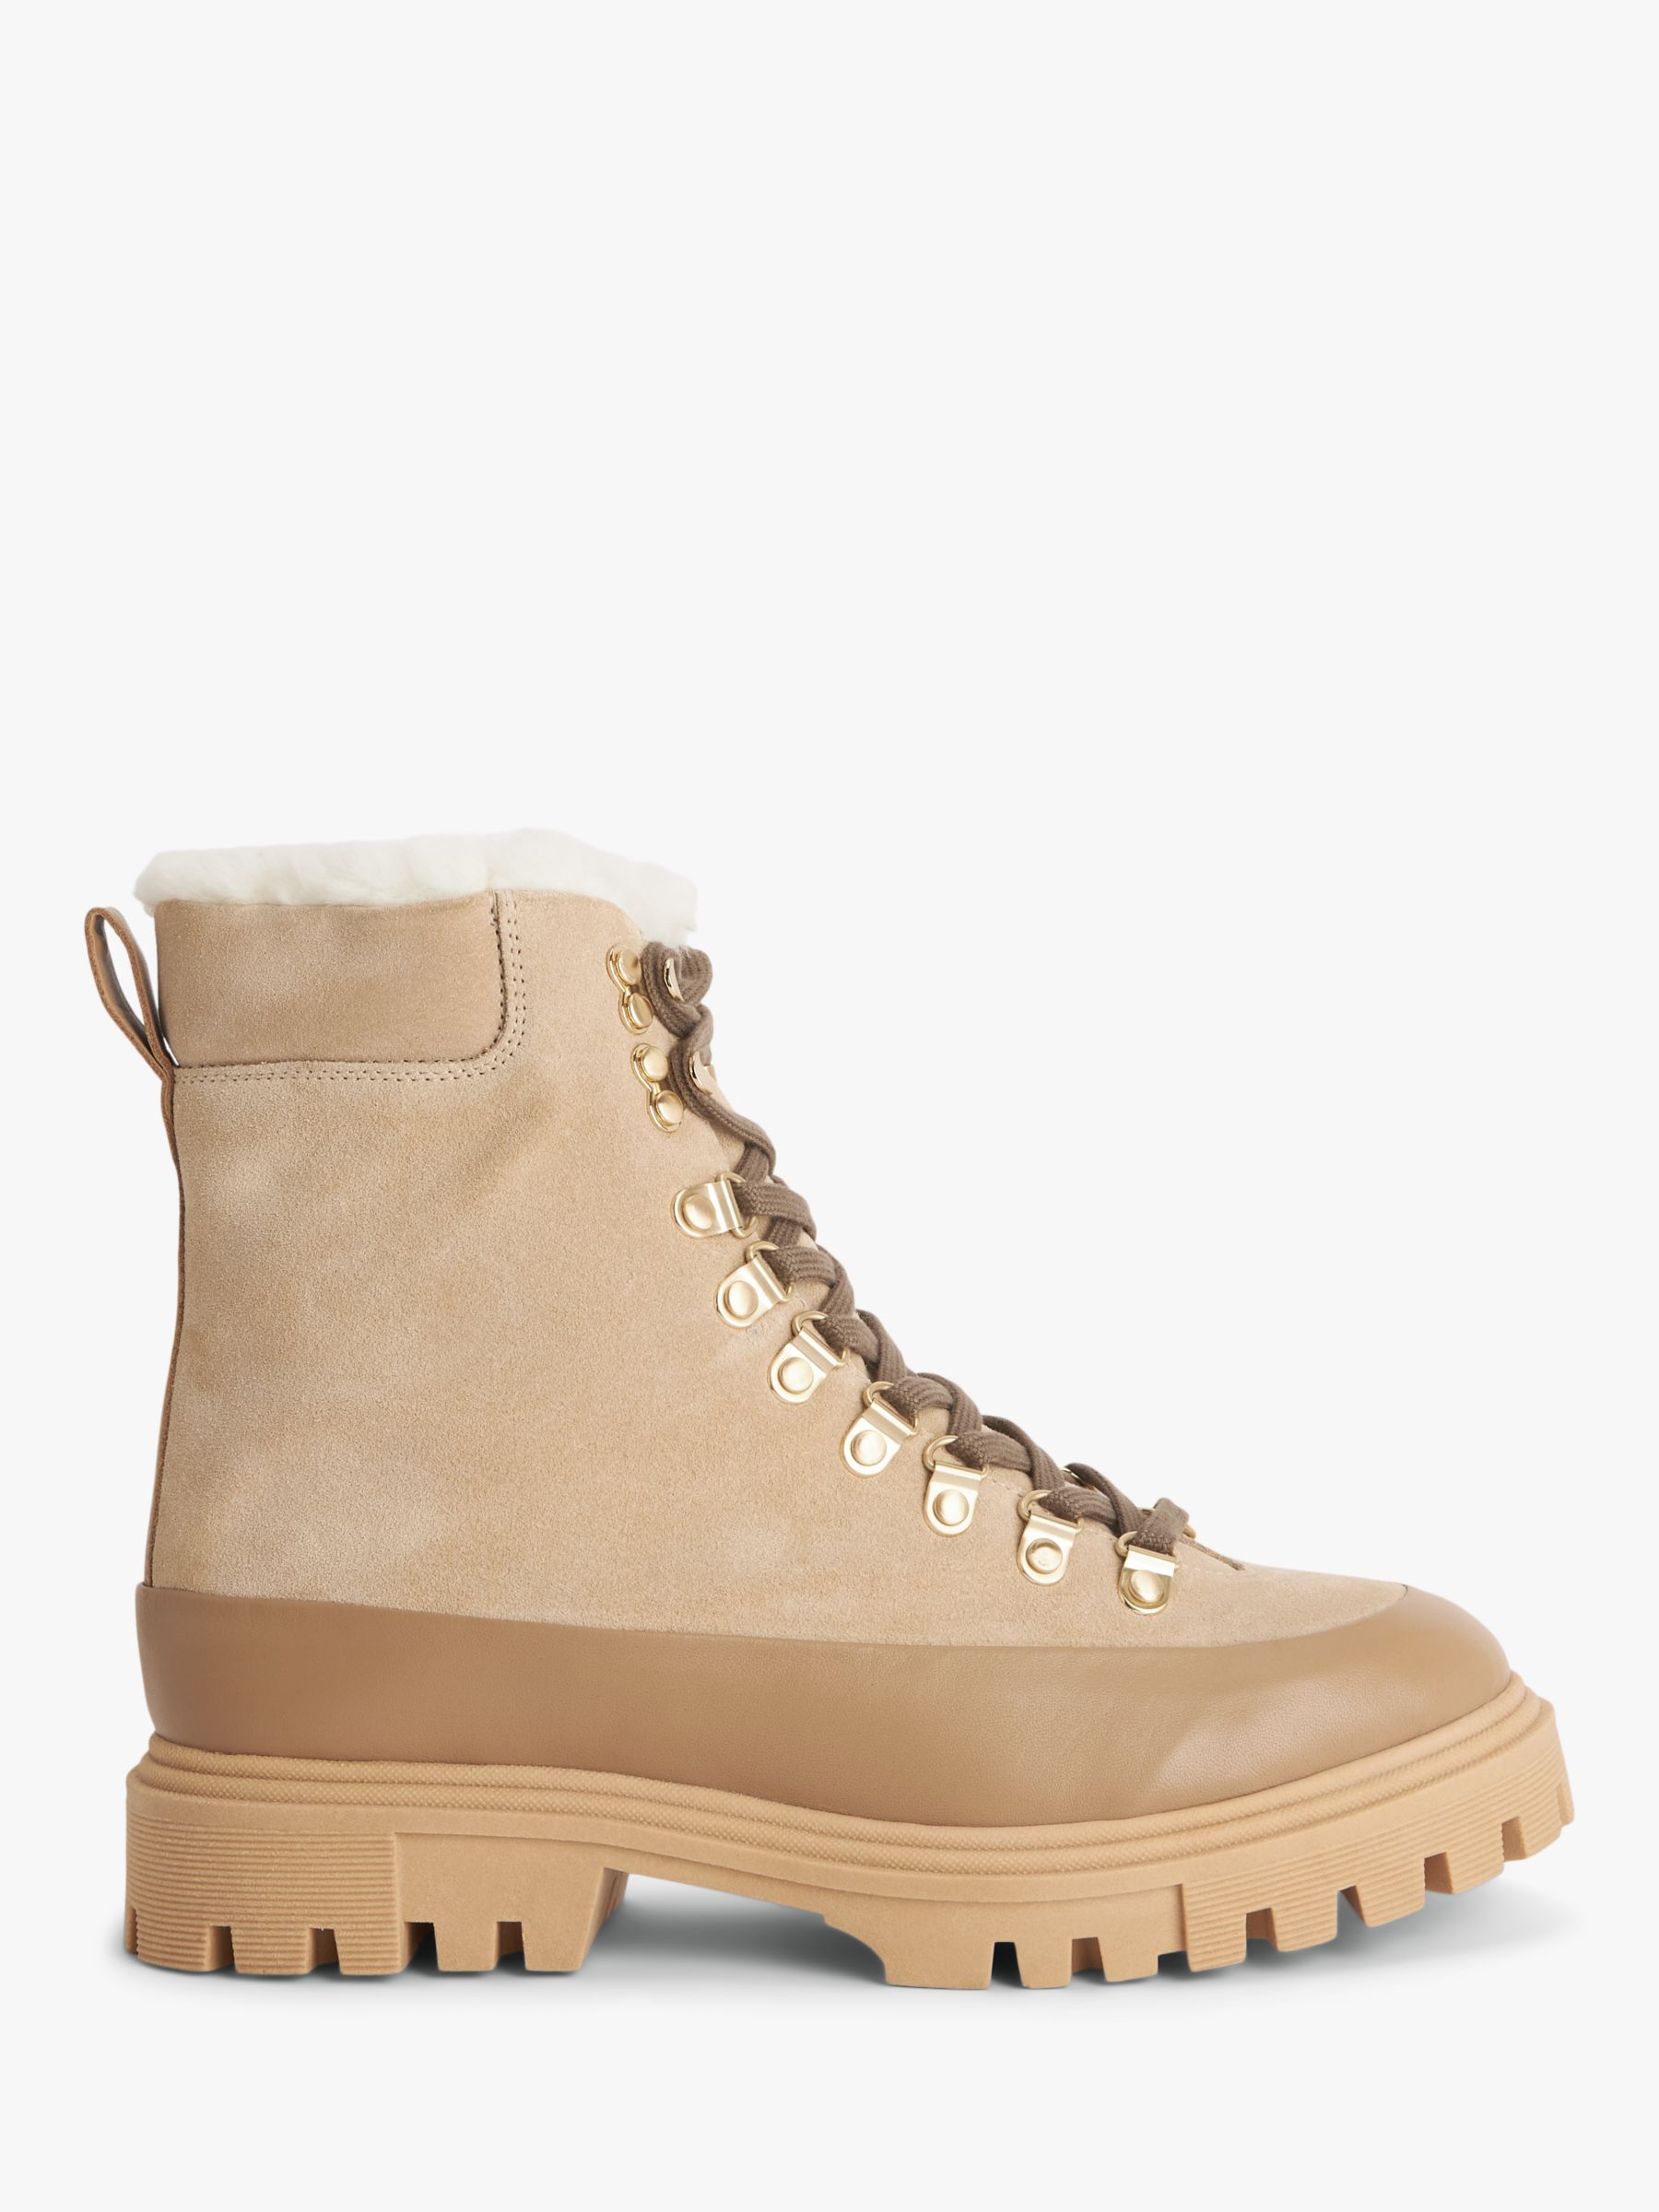 John Lewis Paddock Leather/Suede Lugsole Combat Boots, Sand, 6